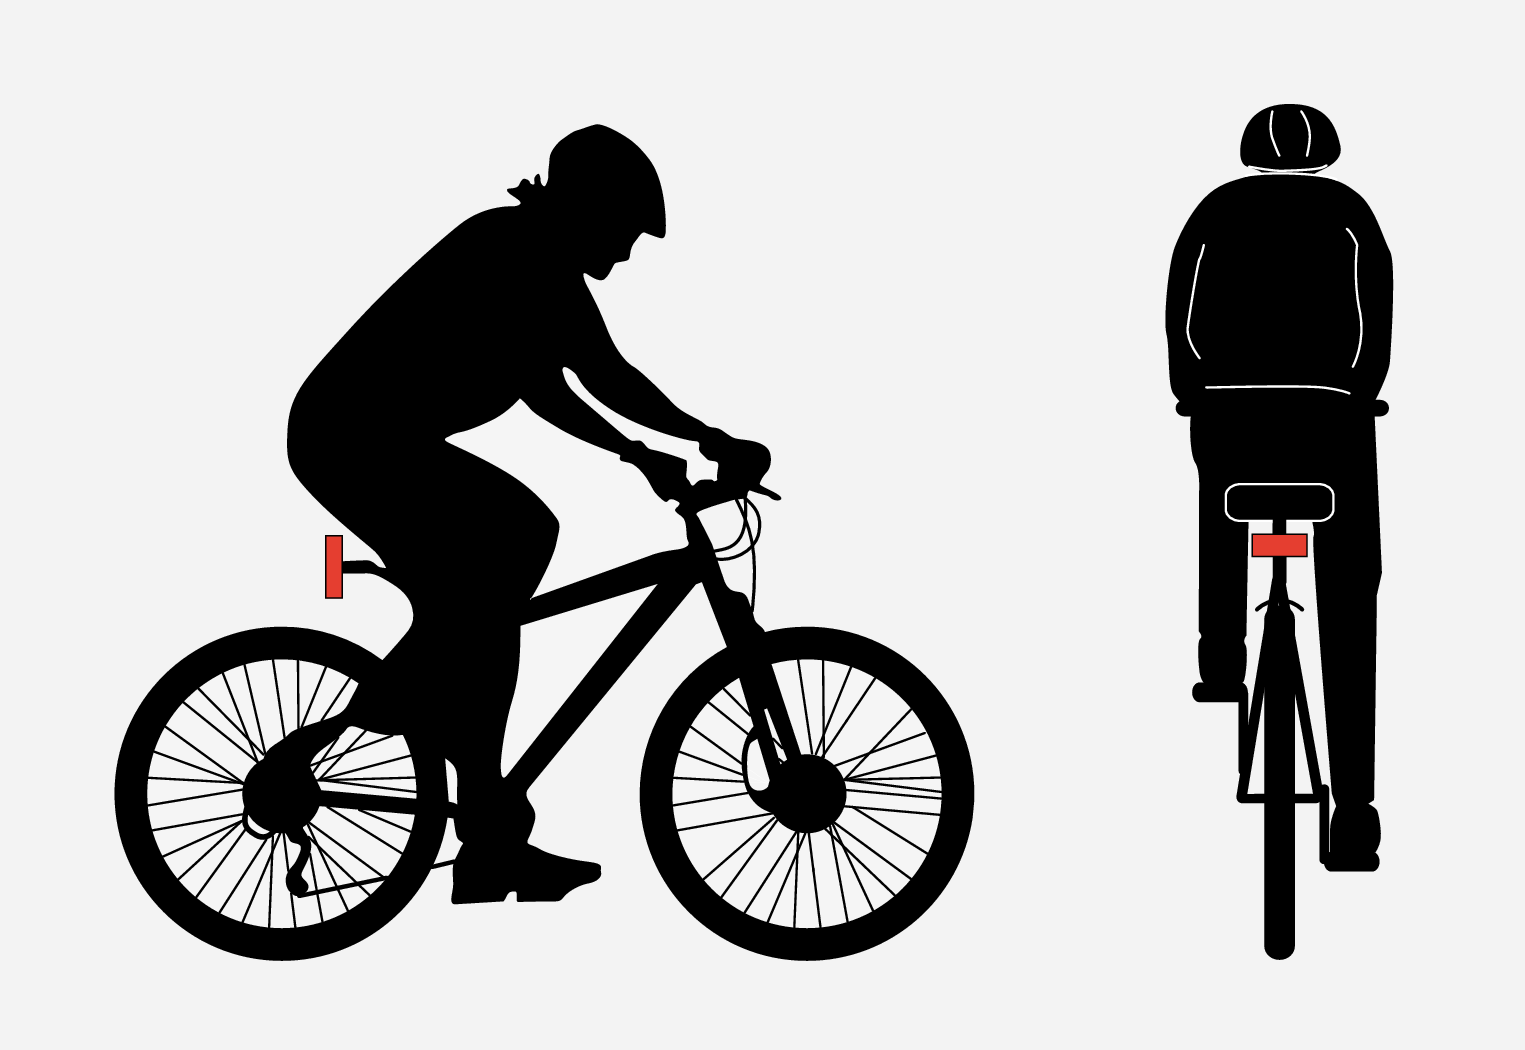 PS-1926-City Safety, detection of cyclists